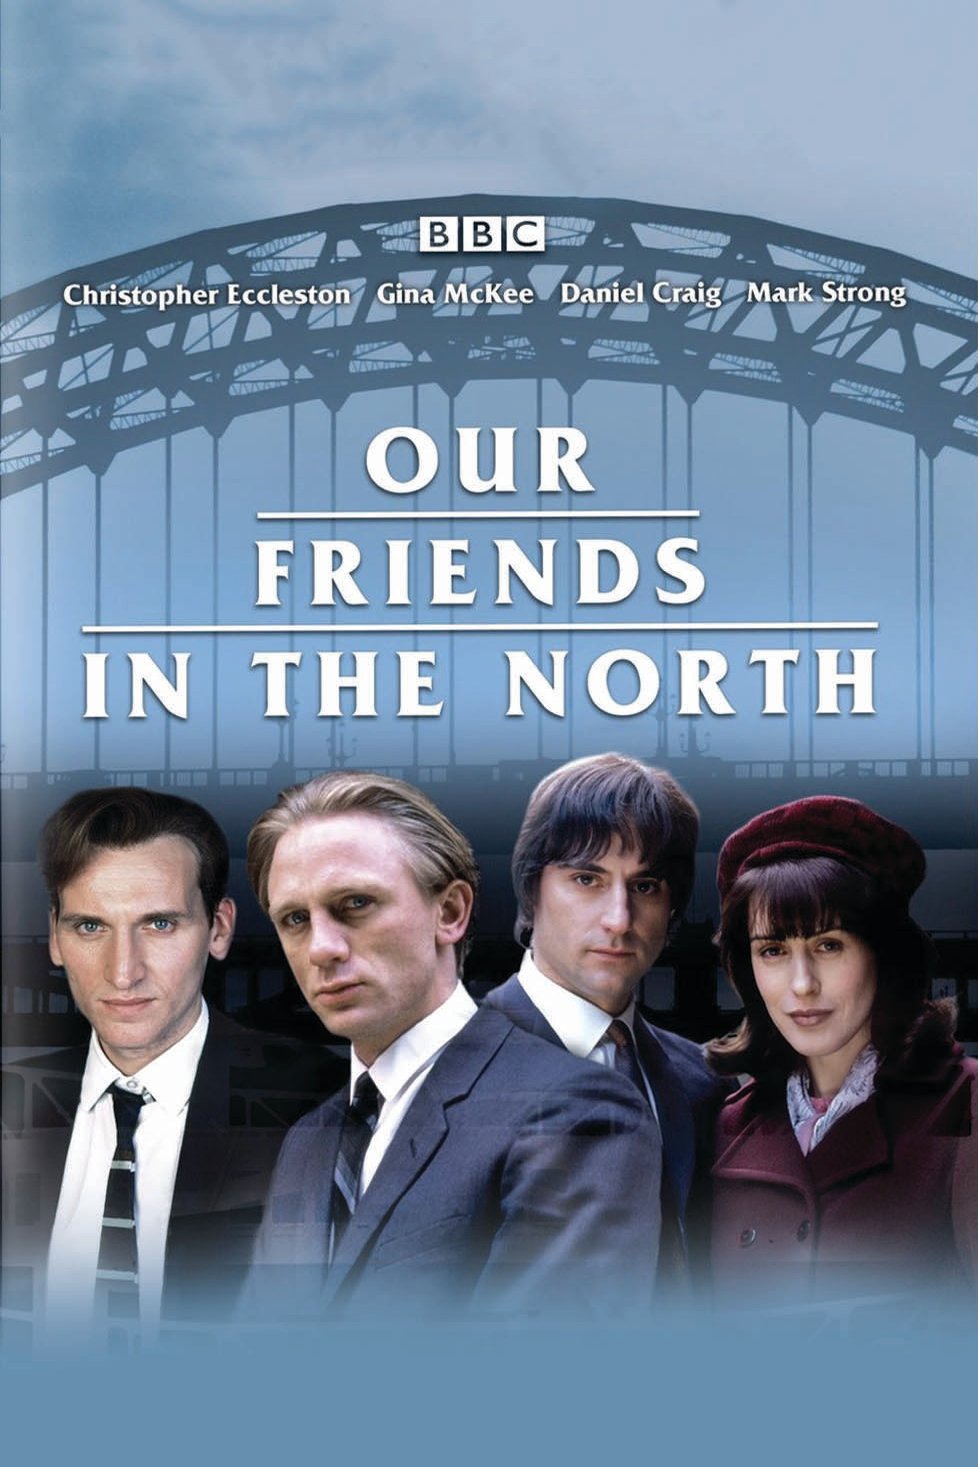 Poster of the movie Our Friends in the North